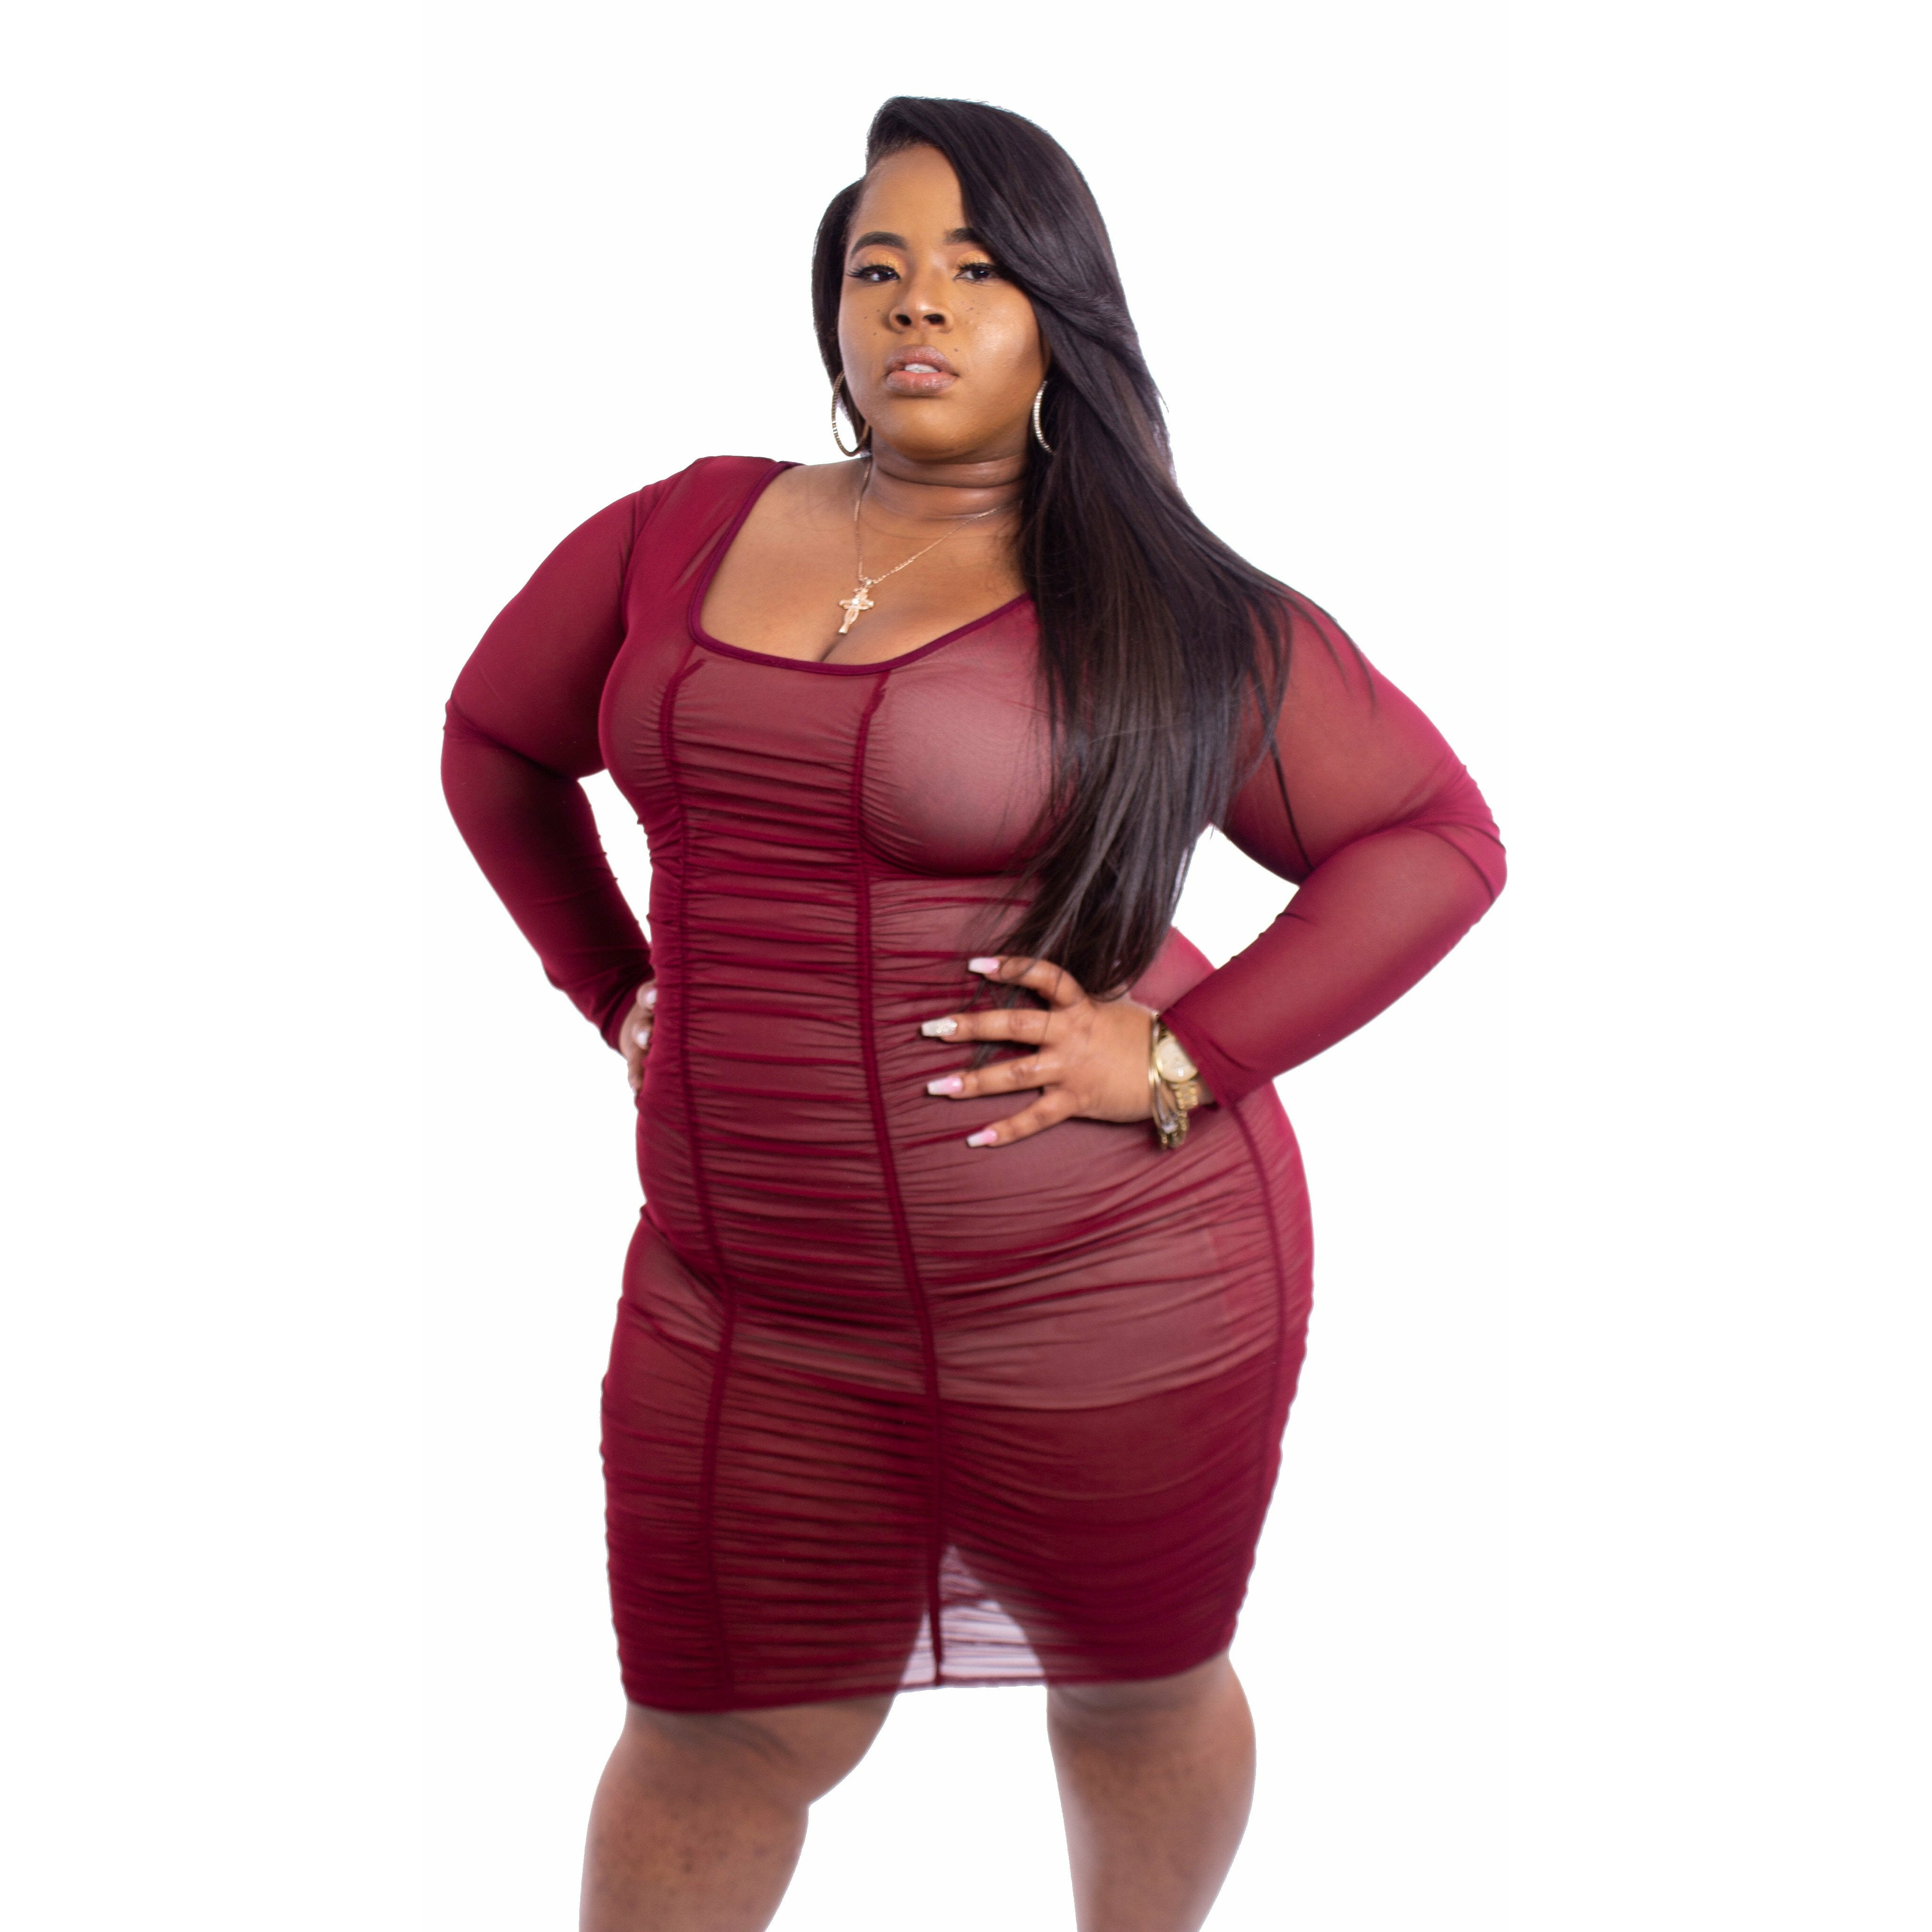 Fine As Wine Dress fine-as-wine-dress Dress 1X,2X,3X Curvy Collection